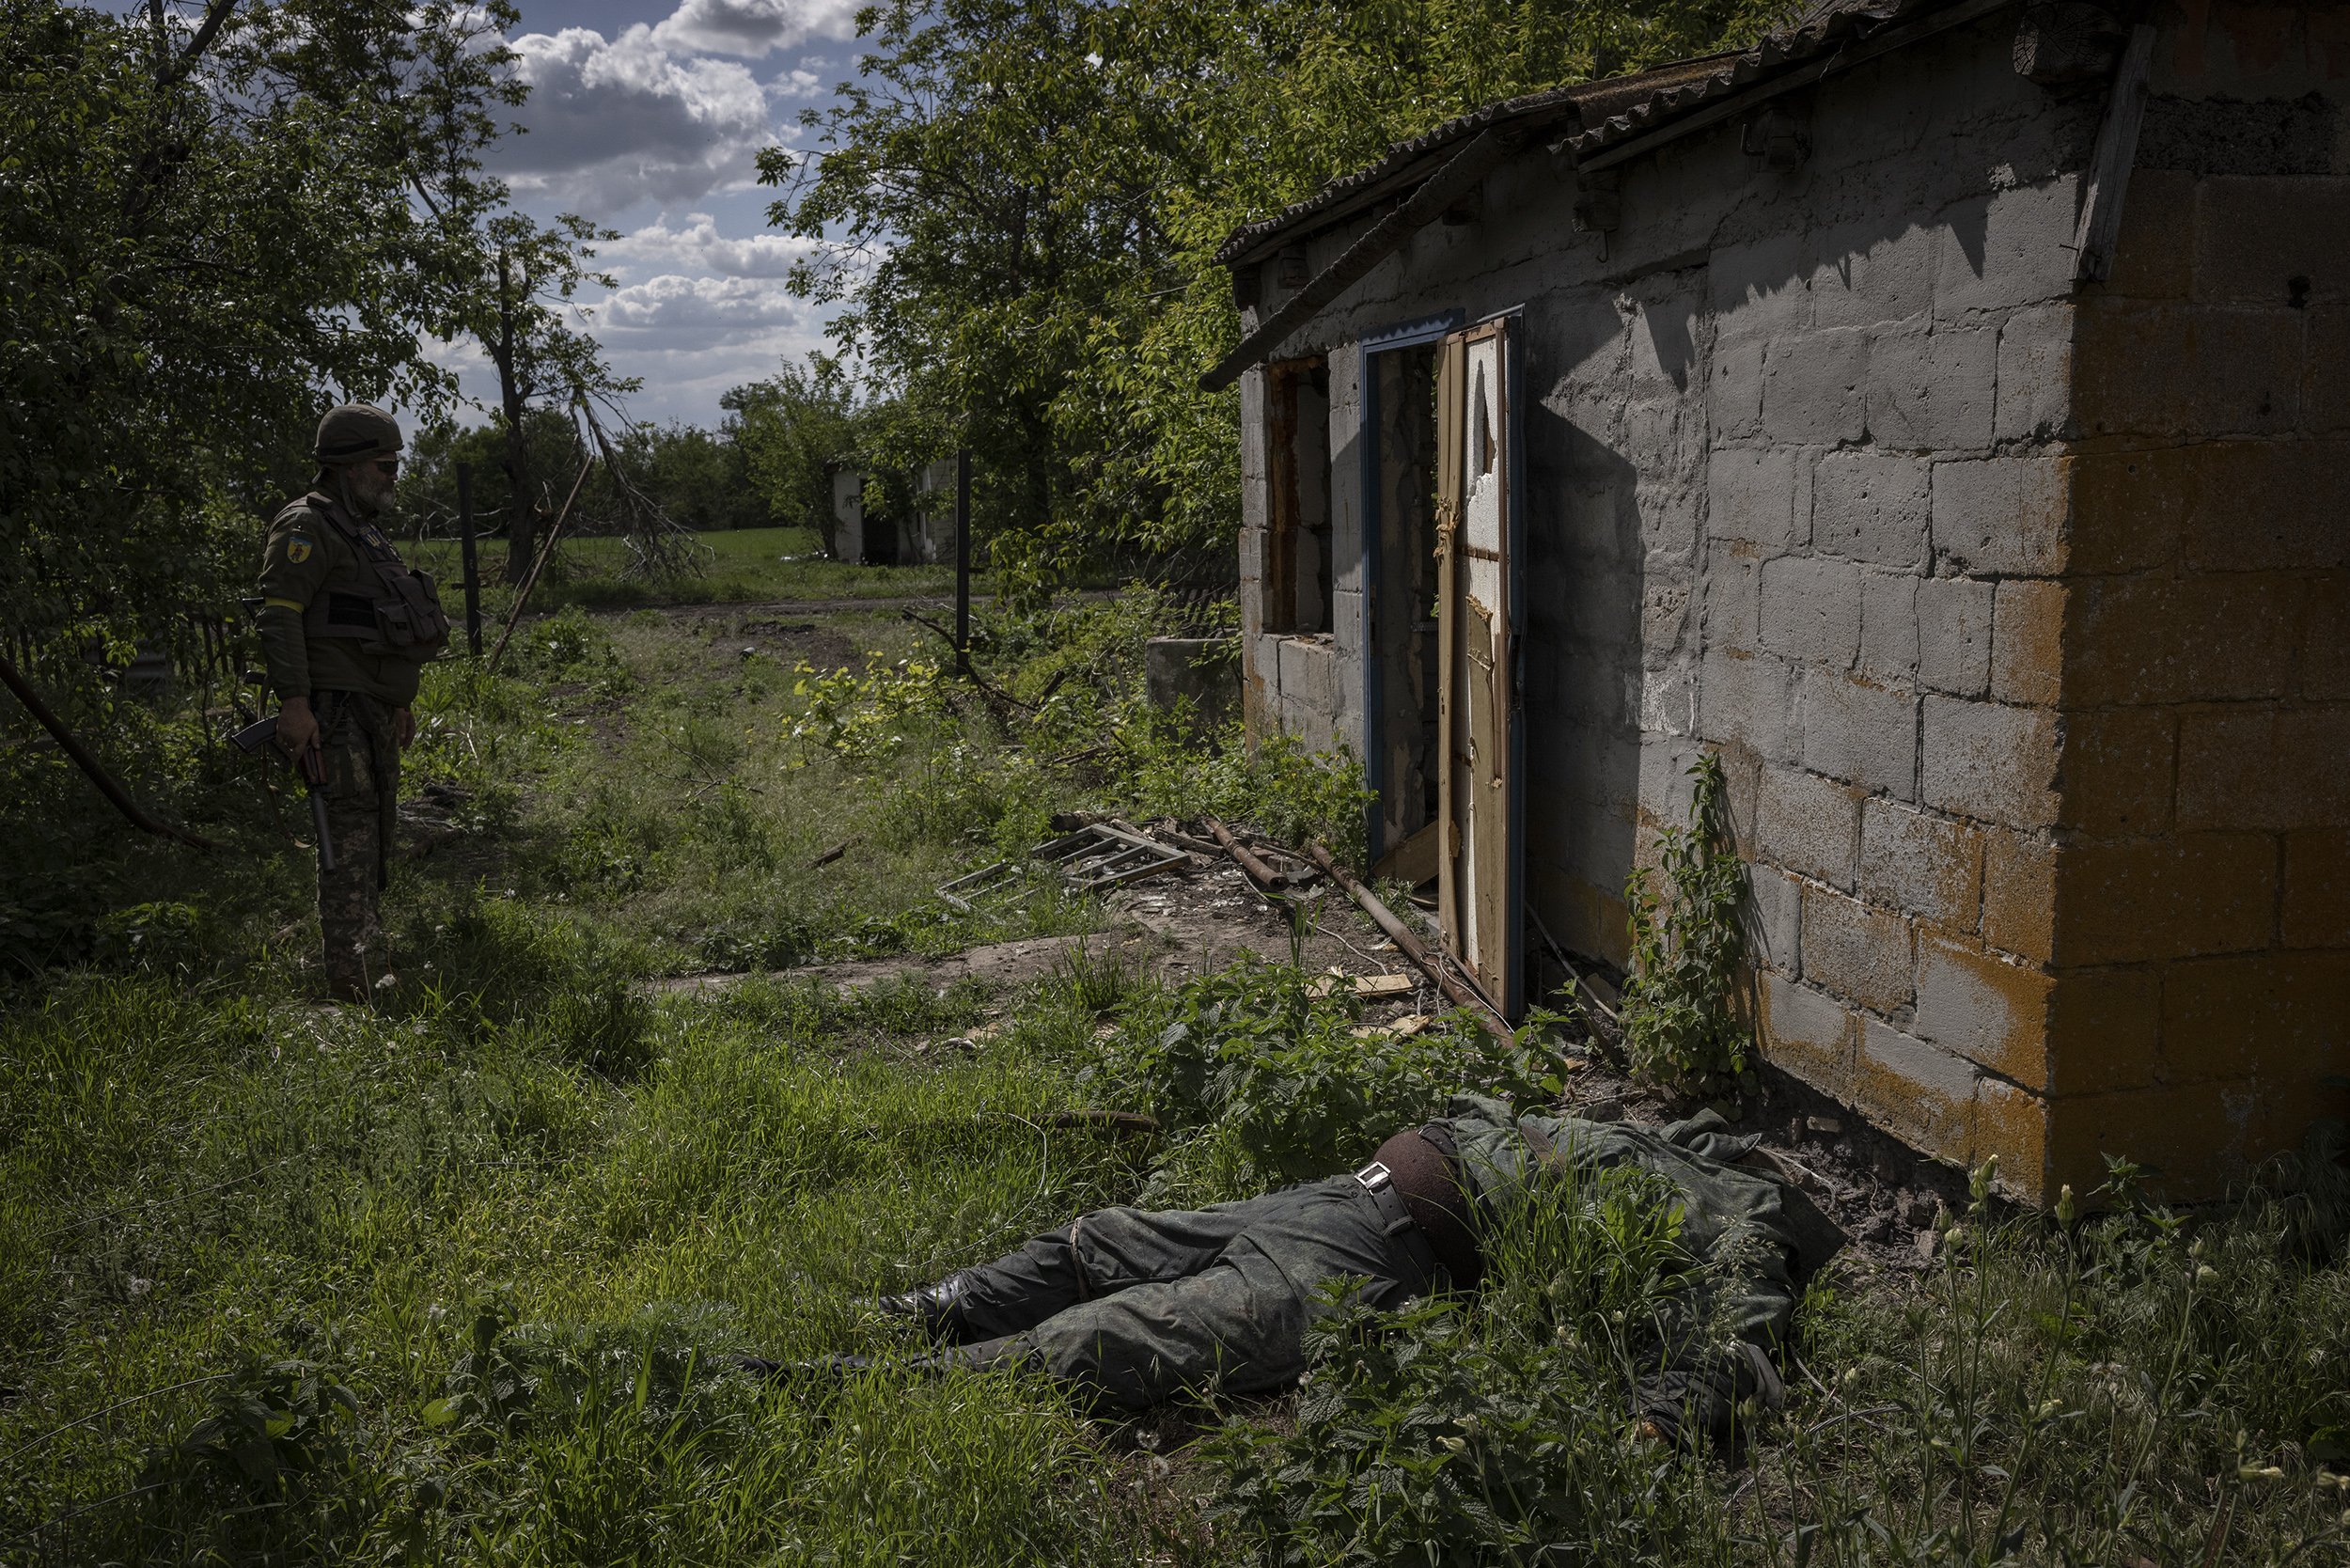  The body of a Russian soldier lay in the garden of a house in the recaptured village of Novopil, which local volunteer fighters had won back several days before. May, 2022. 